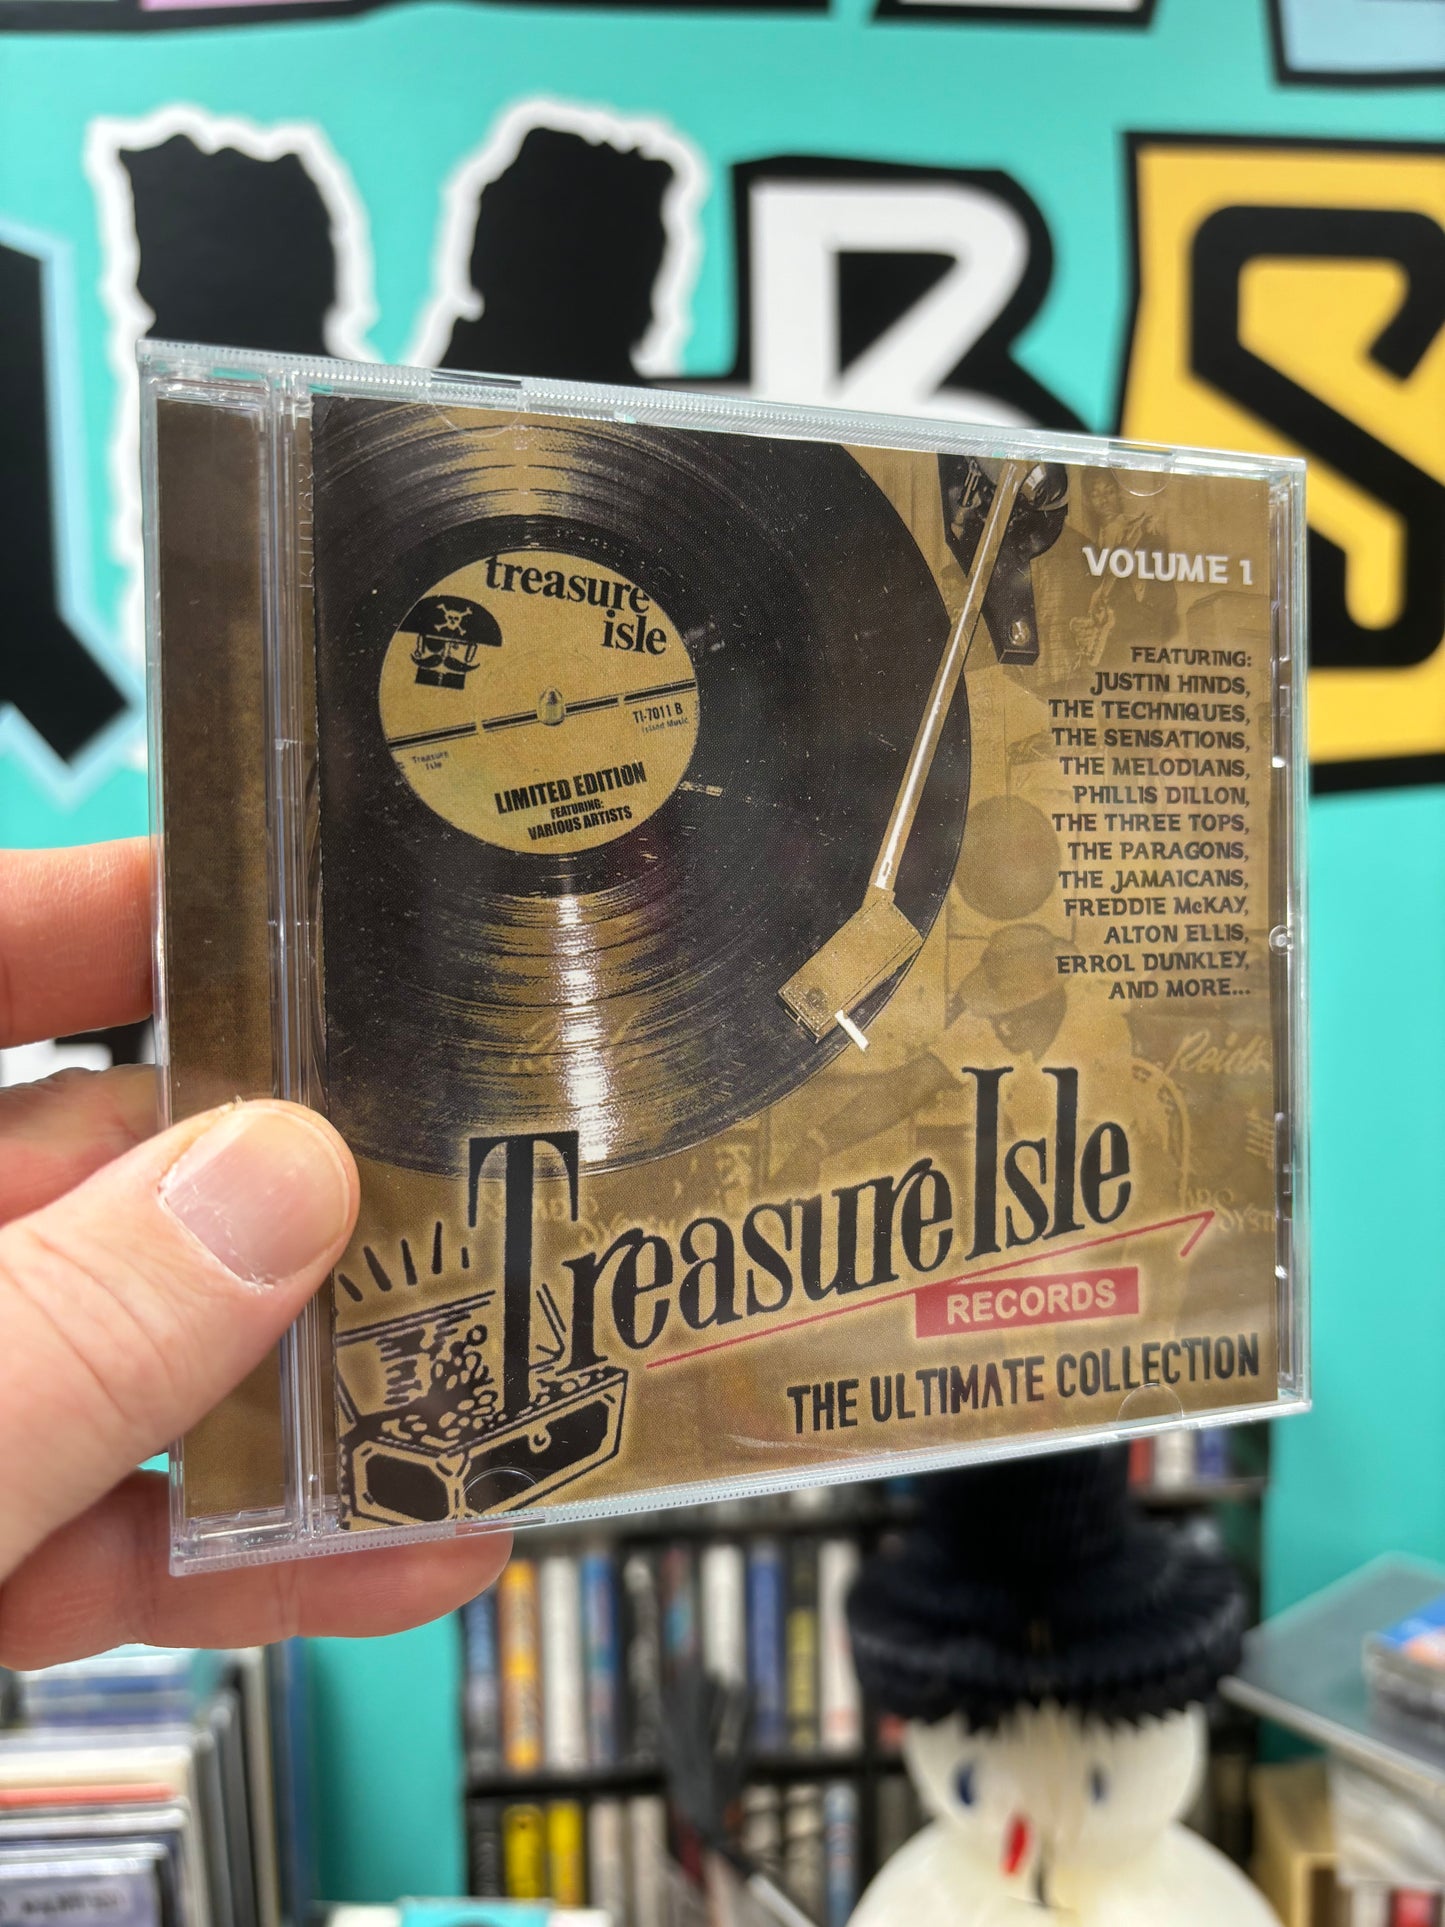 Treasure Isle Records - The Ultimate Collection, Volume 1-3, 3CD, Box Set Compilation, Country, year?